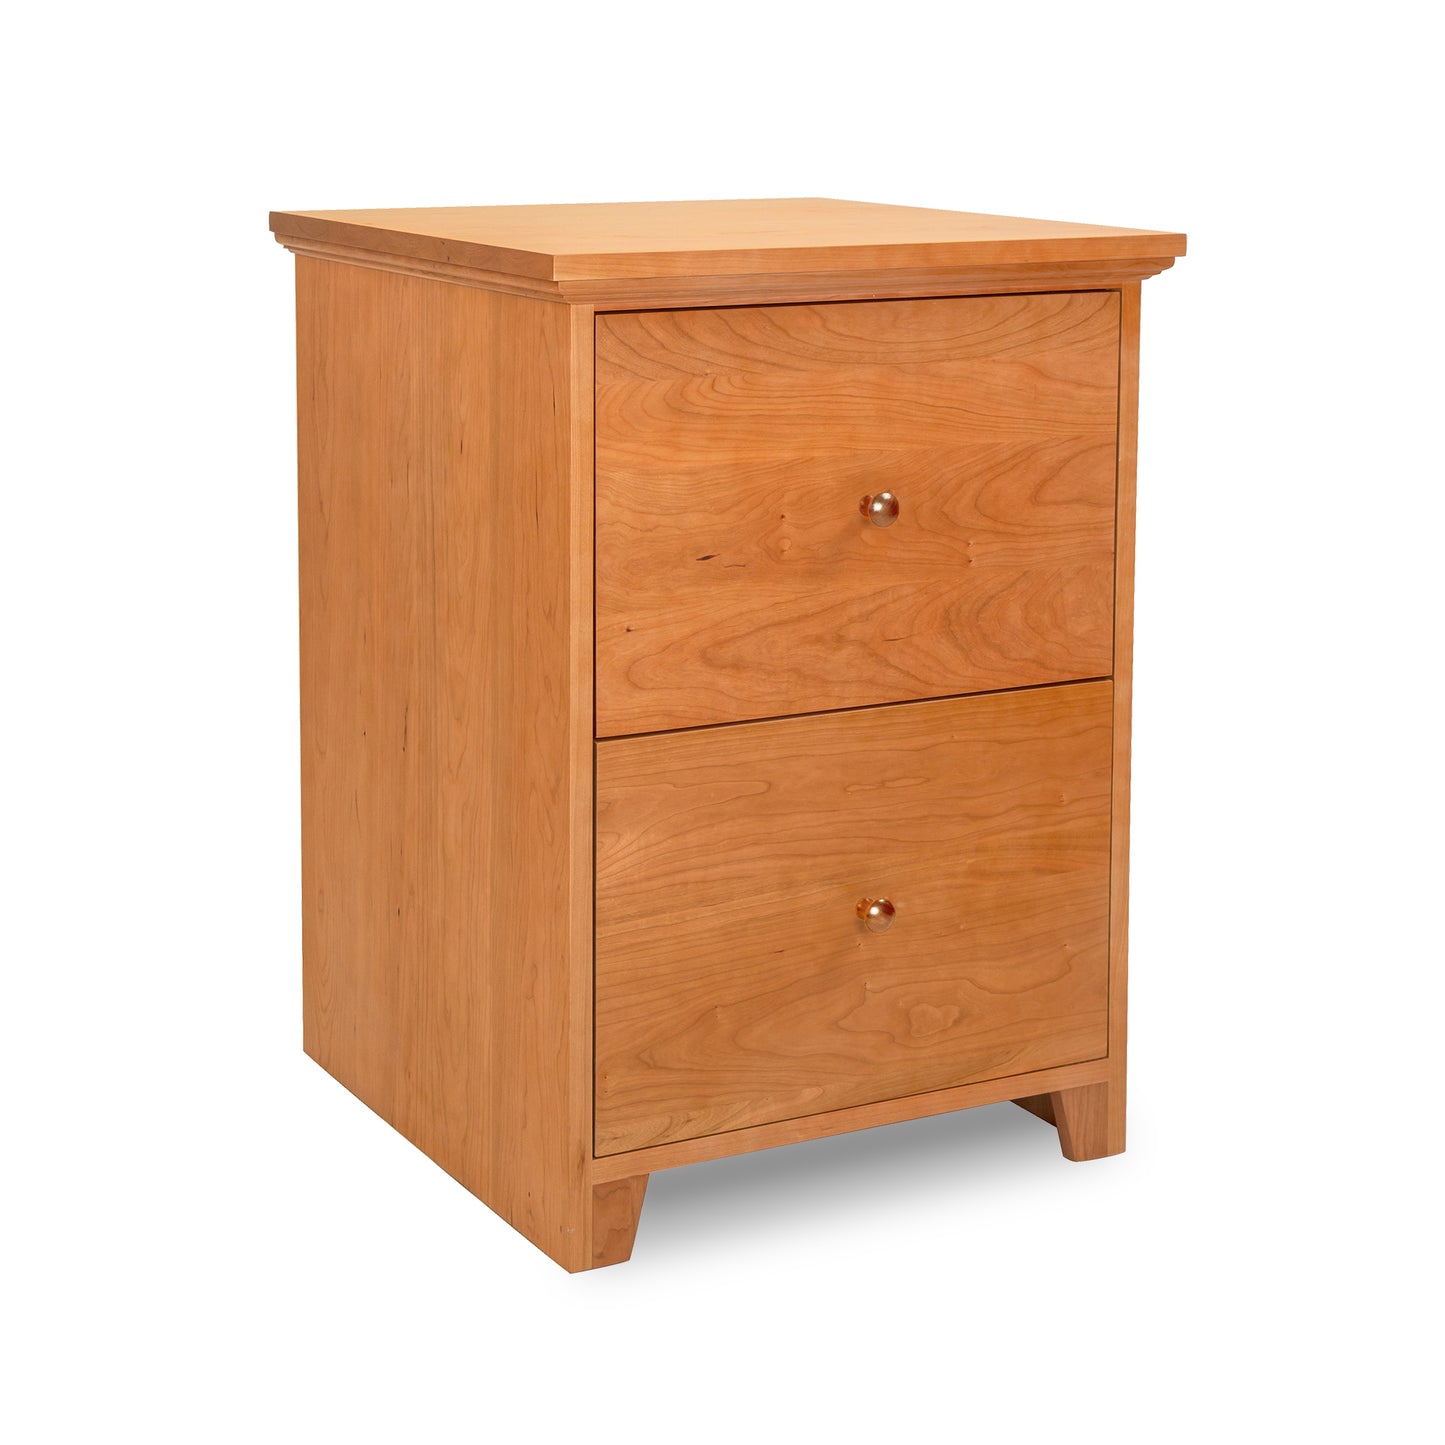 A Shaker 2-Drawer Vertical File Cabinet by Lyndon Furniture, made of cherry wood.